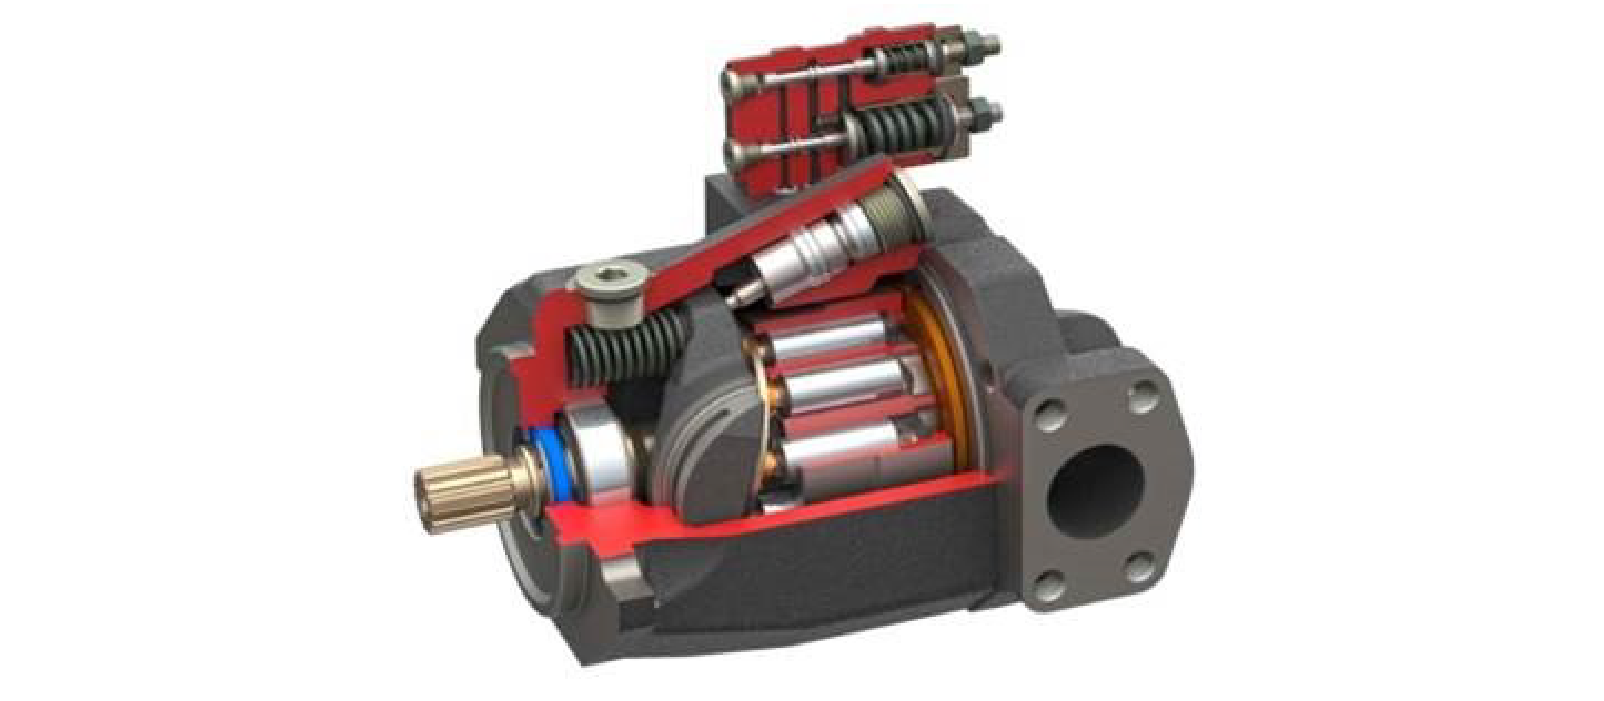 A cut-away of an example piston pump shows the internal pistons and swash plate that transfers the hydraulic energy to mechanical energy and vice versa.